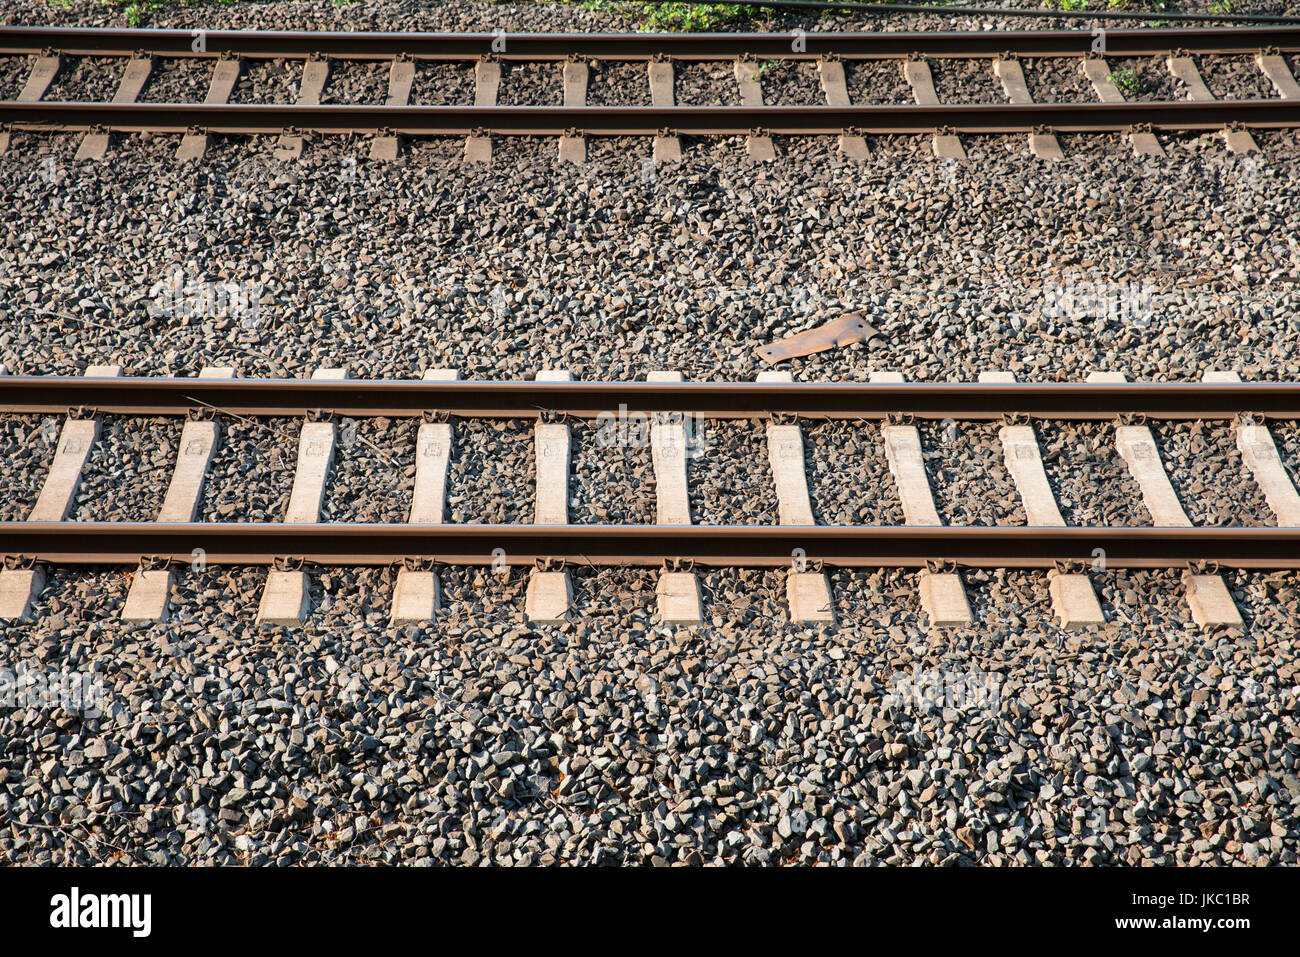 rails and close-up train rail, gleise, in germany Stock Photo - Alamy